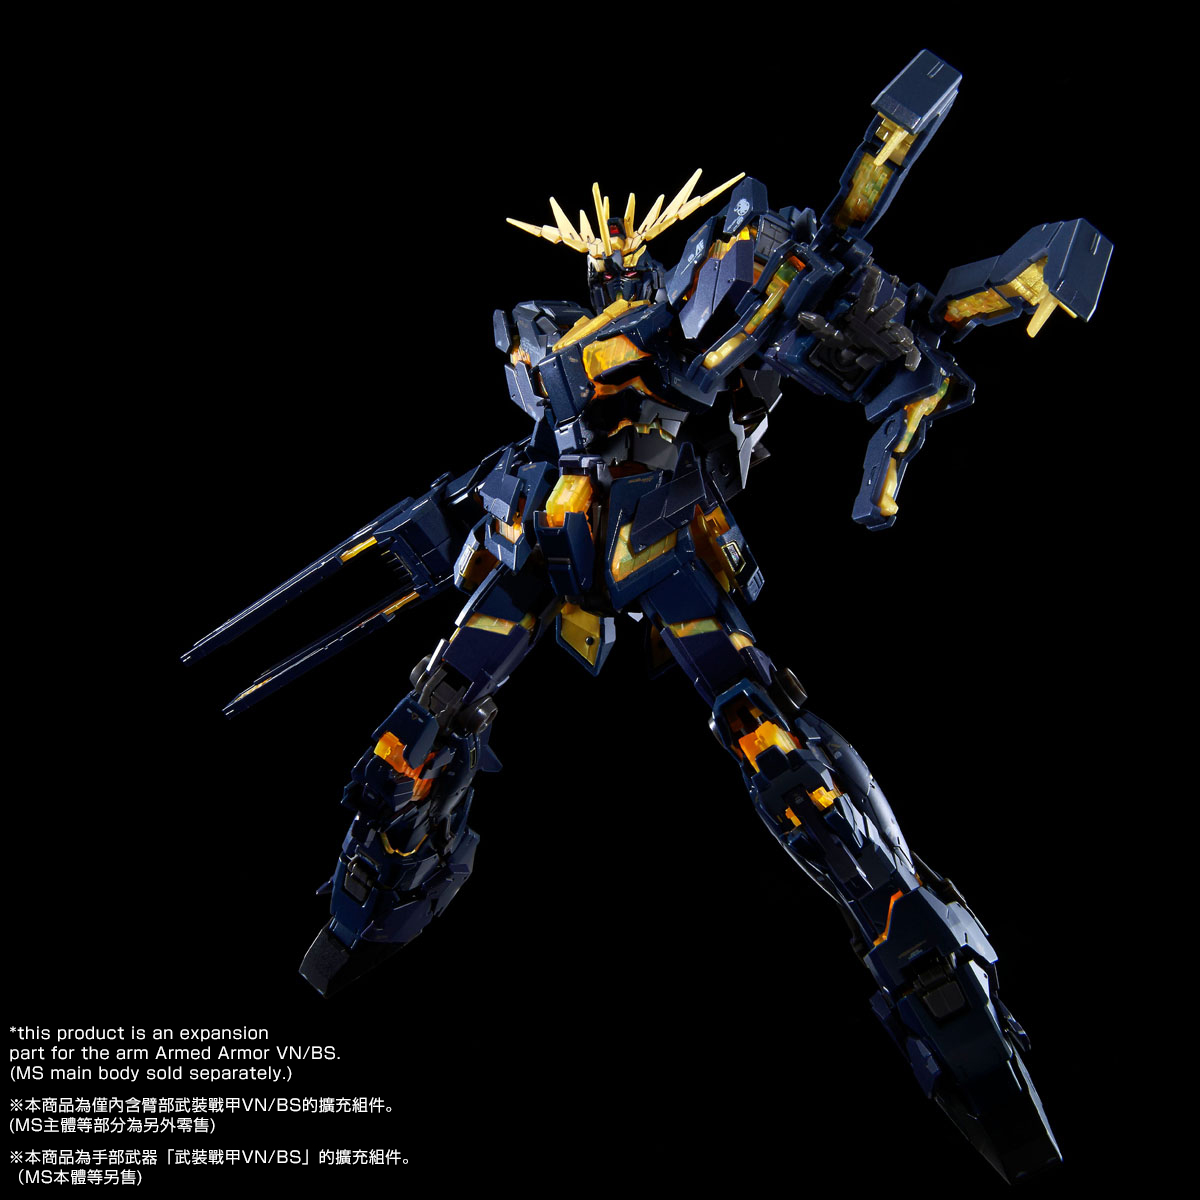 RG 1/144 EXPANSION UNIT ARMED ARMOR VN/BS